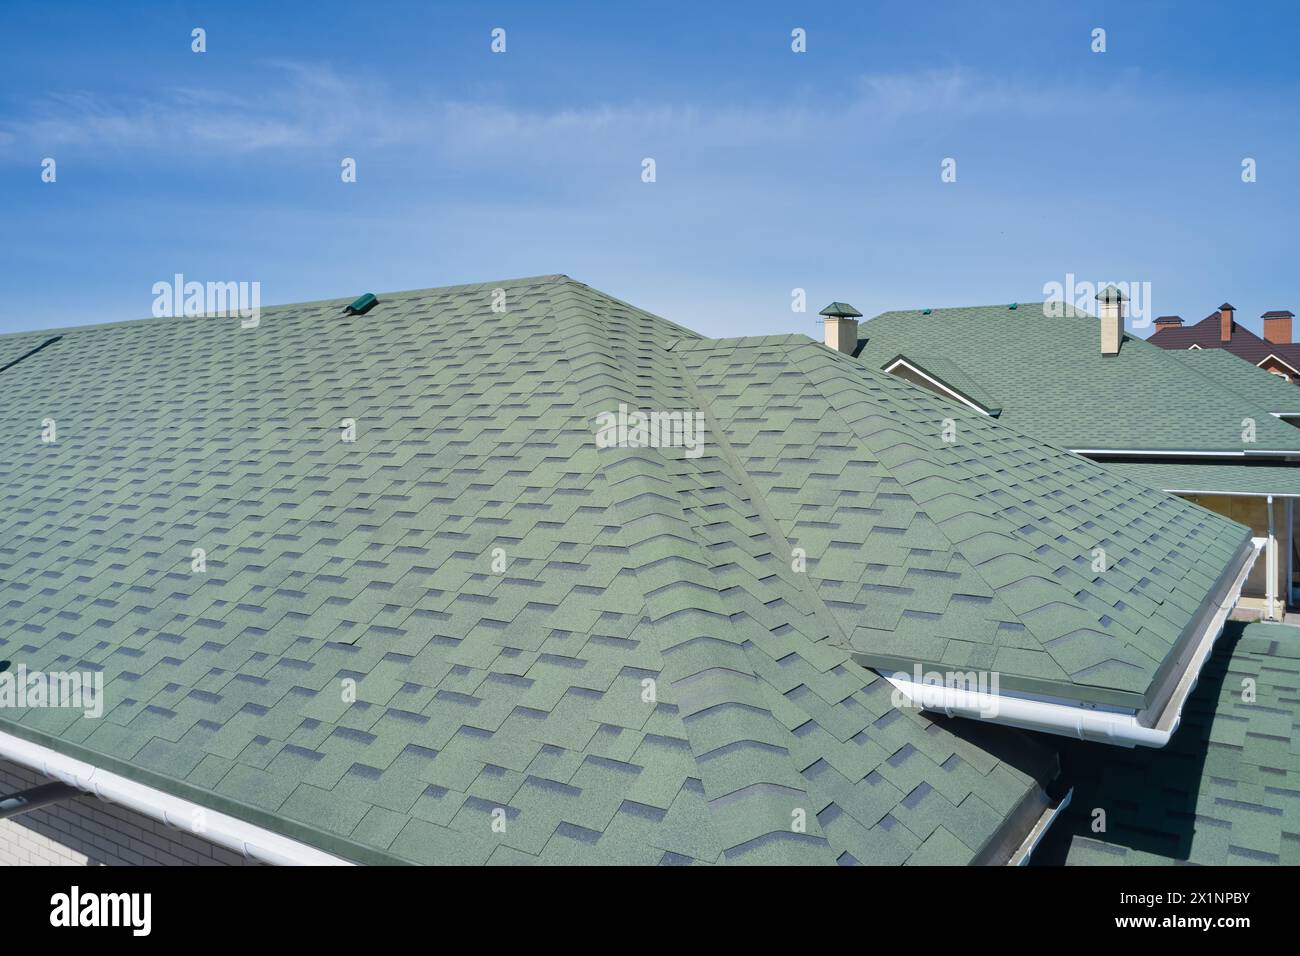 Roof of the house made of soft tiles aerial view. Stock Photo